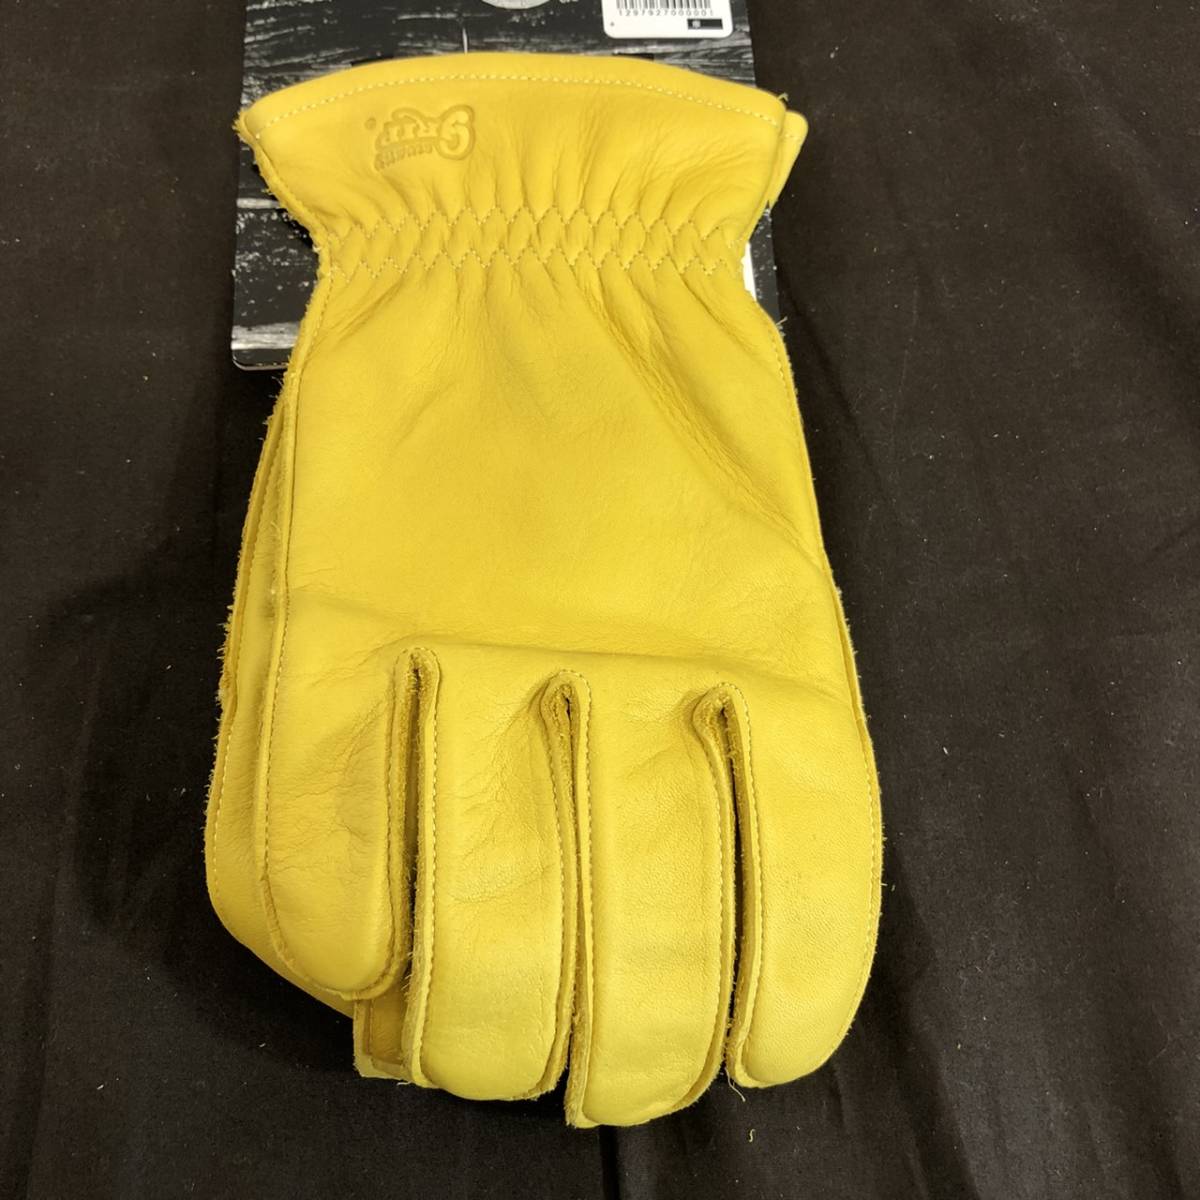 *[MH-5963] new goods unused goods GRIP SWANY grip Swany G-1 leather glove gloves size L yellow kevlar camp outdoor shortage of stock 